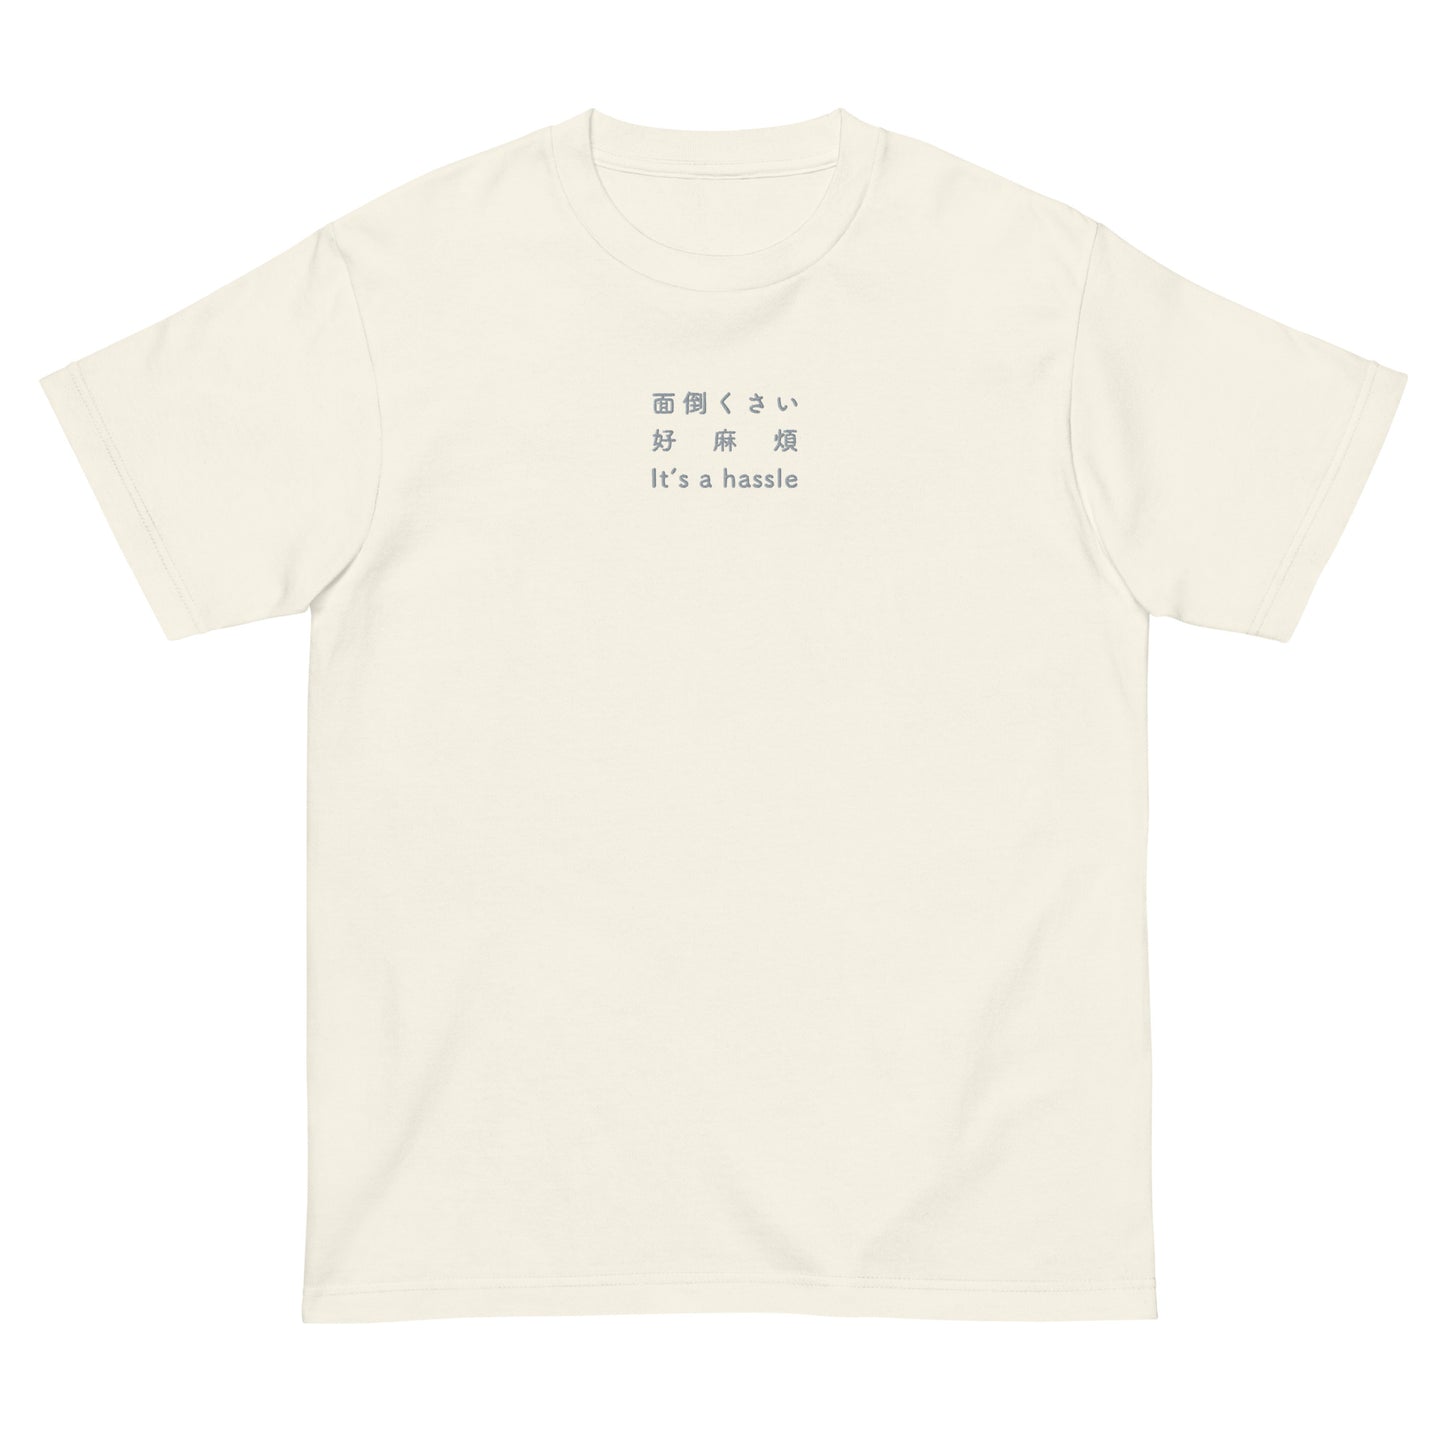 Ivory High Quality Tee - Front Design with an Light GrayEmbroidery "It's a hassle" in Japanese,Chinese and English